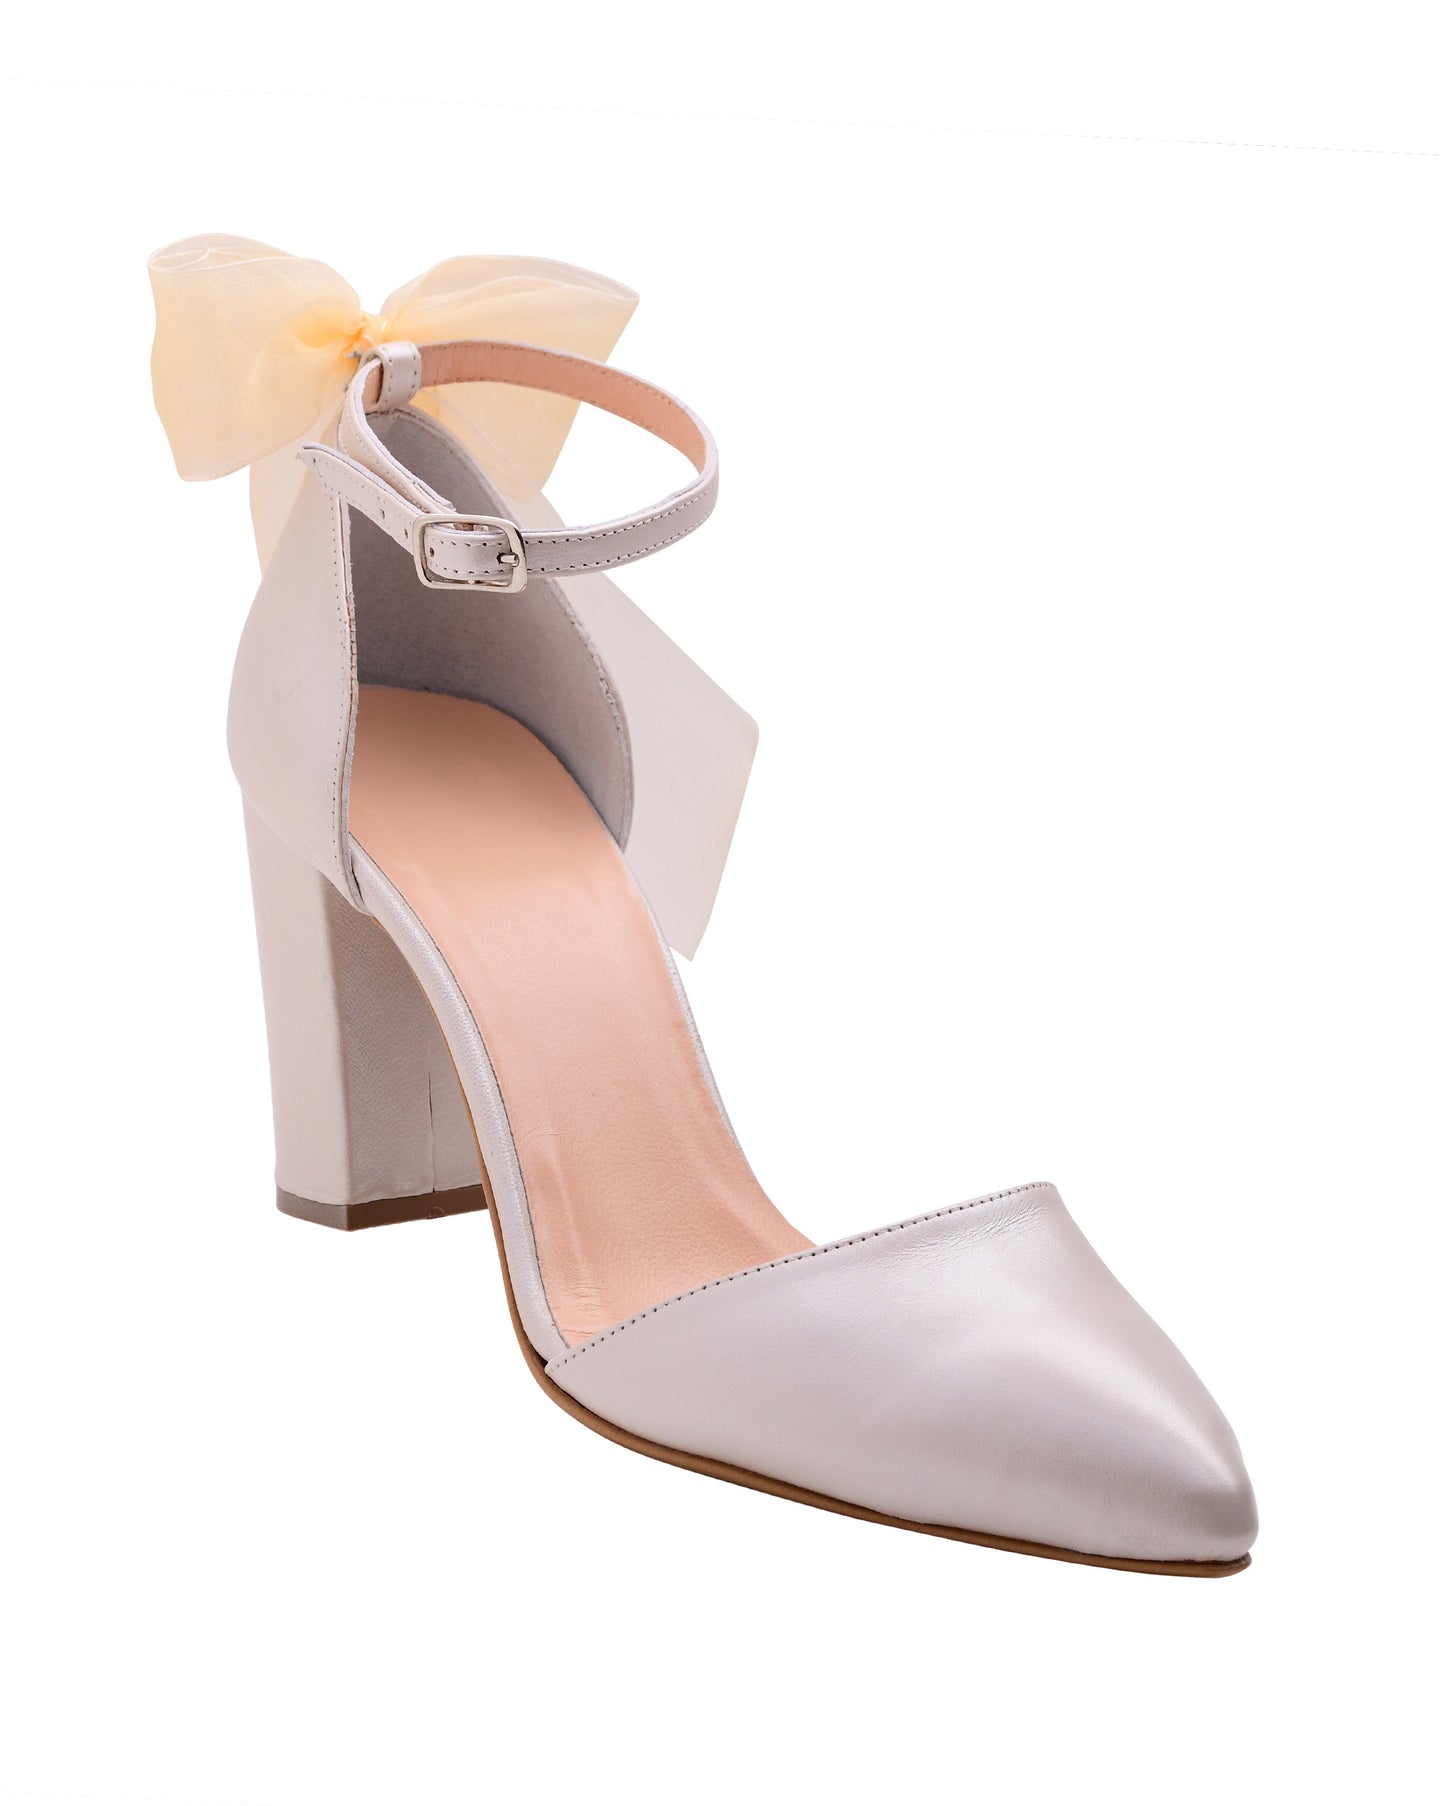 ivory wedding shoes with bow, bow high heels